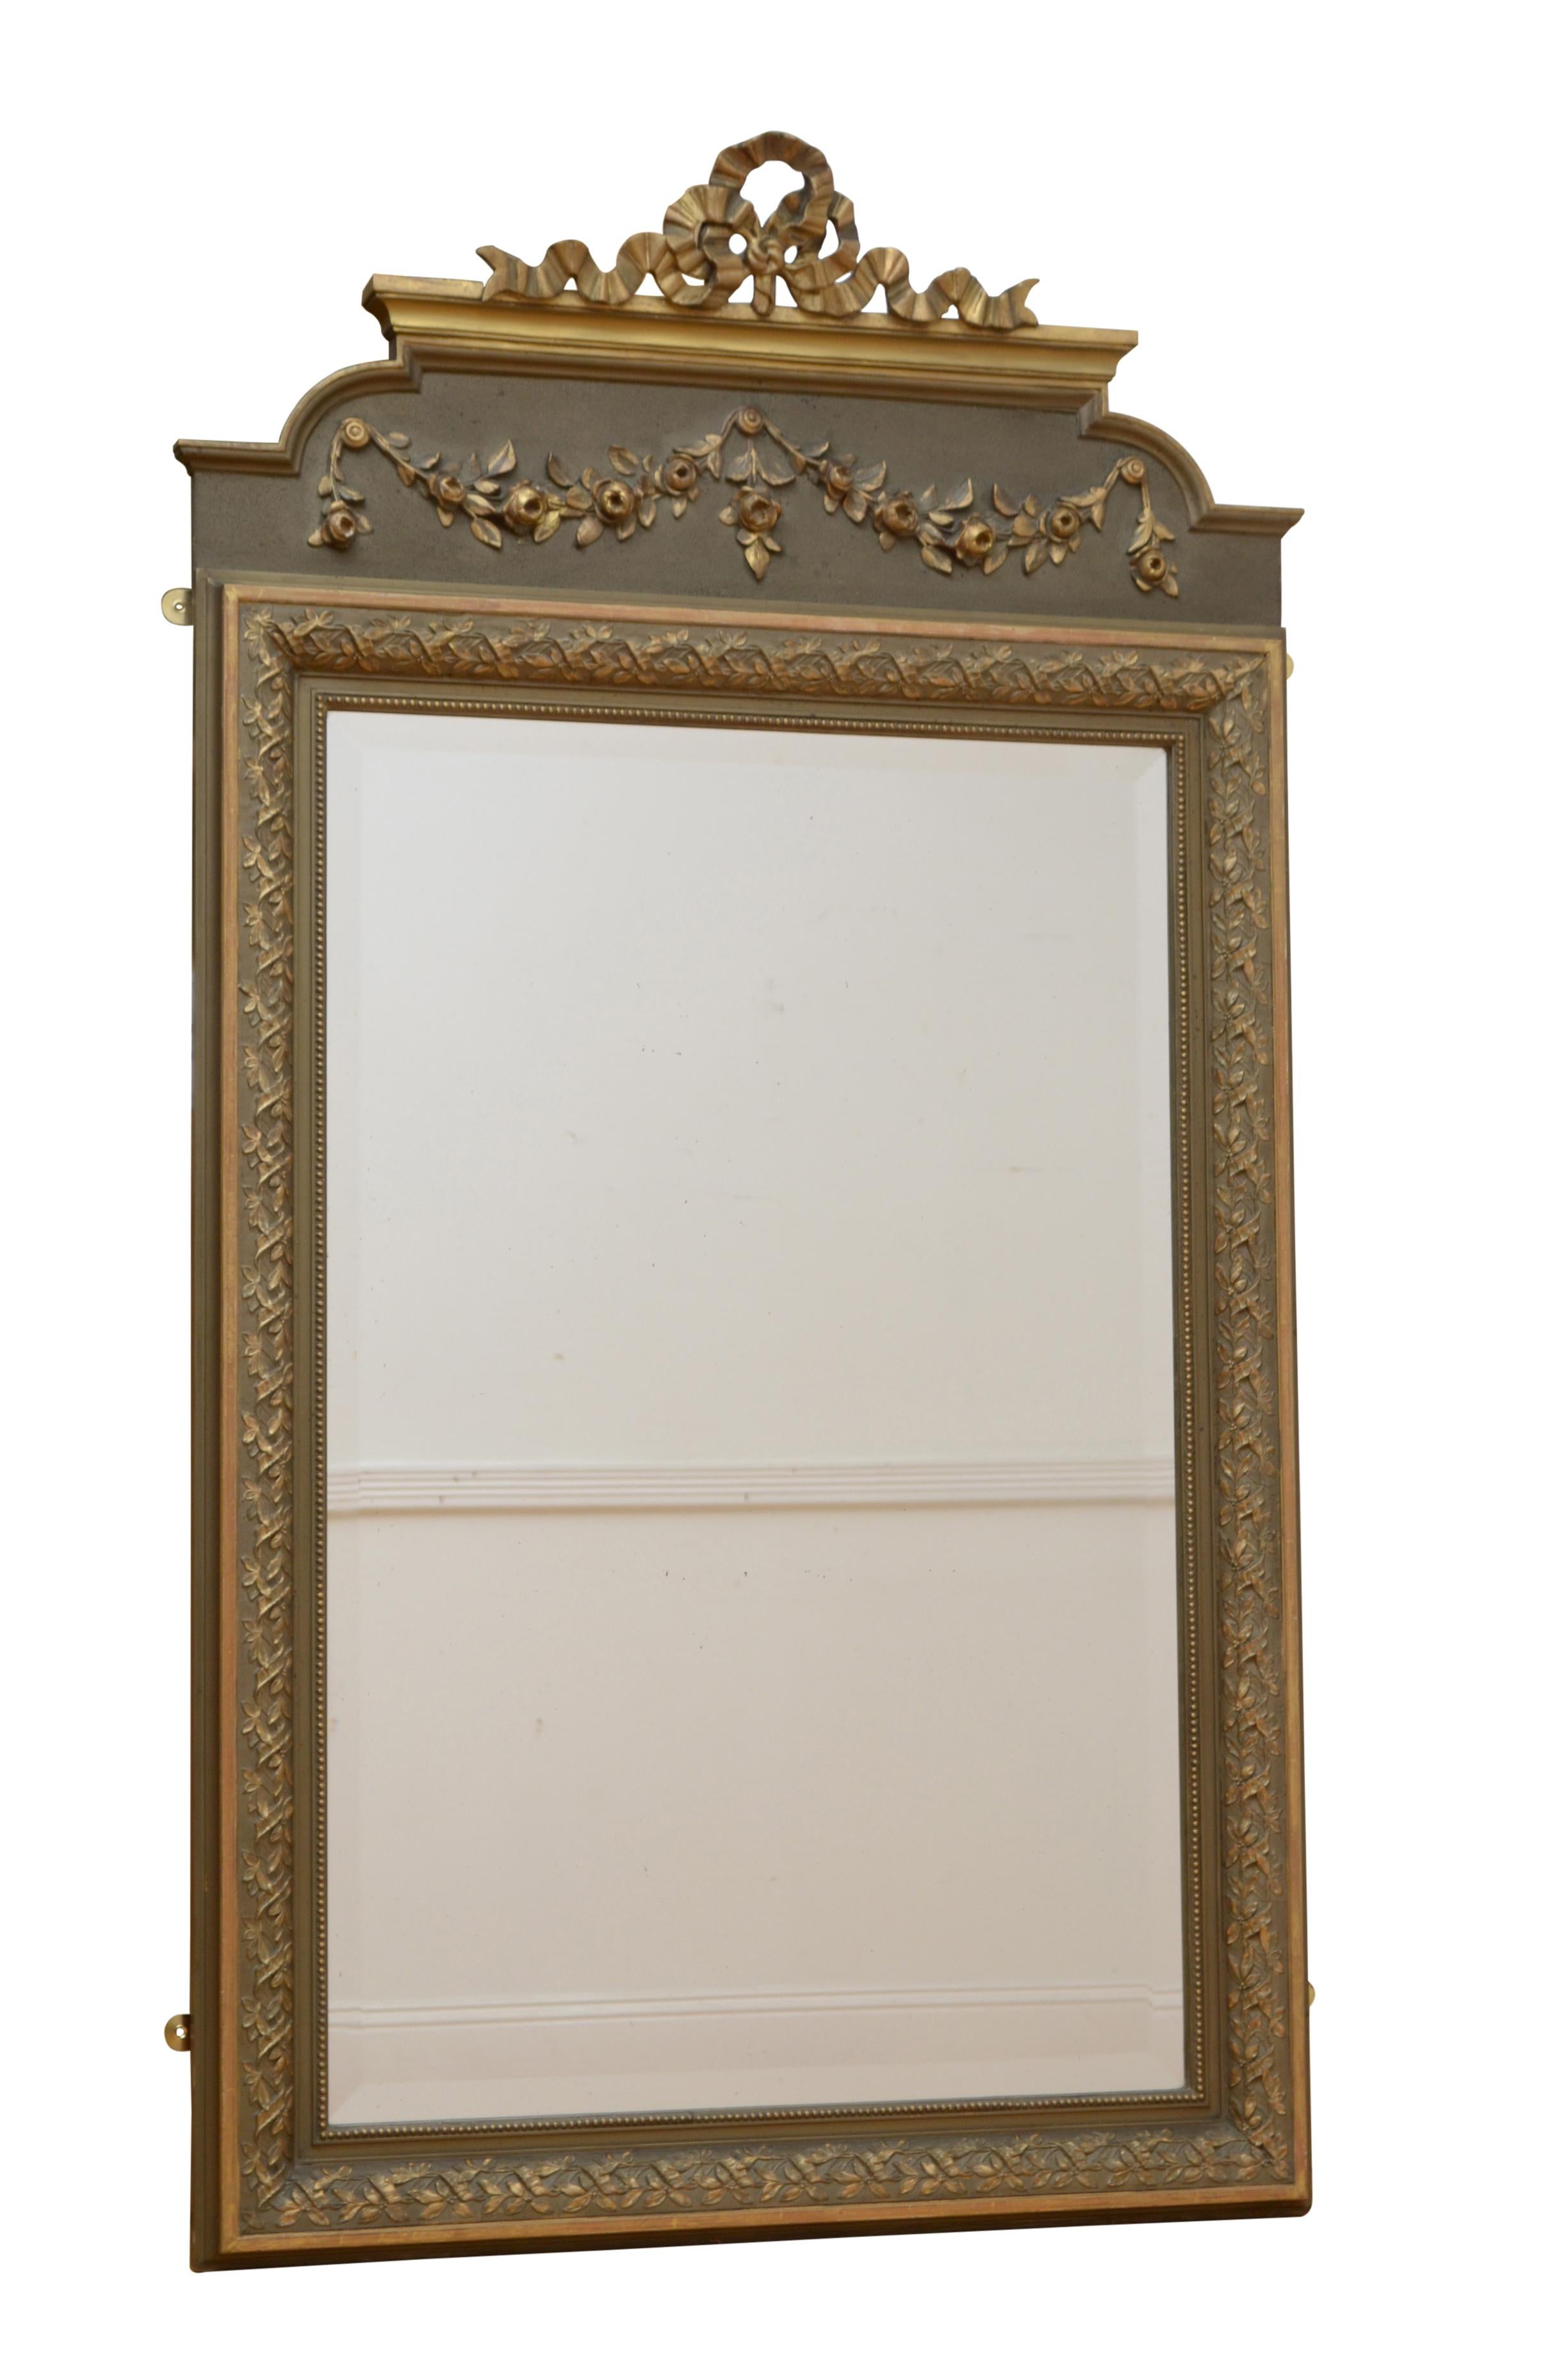 0234 attractive French wall mirror, having original bevelled edge glass in moulded and flower carved gilded frame with floral swags on a olive green board and gilded bow to the top. This antique mirror retains its original glass and original paint